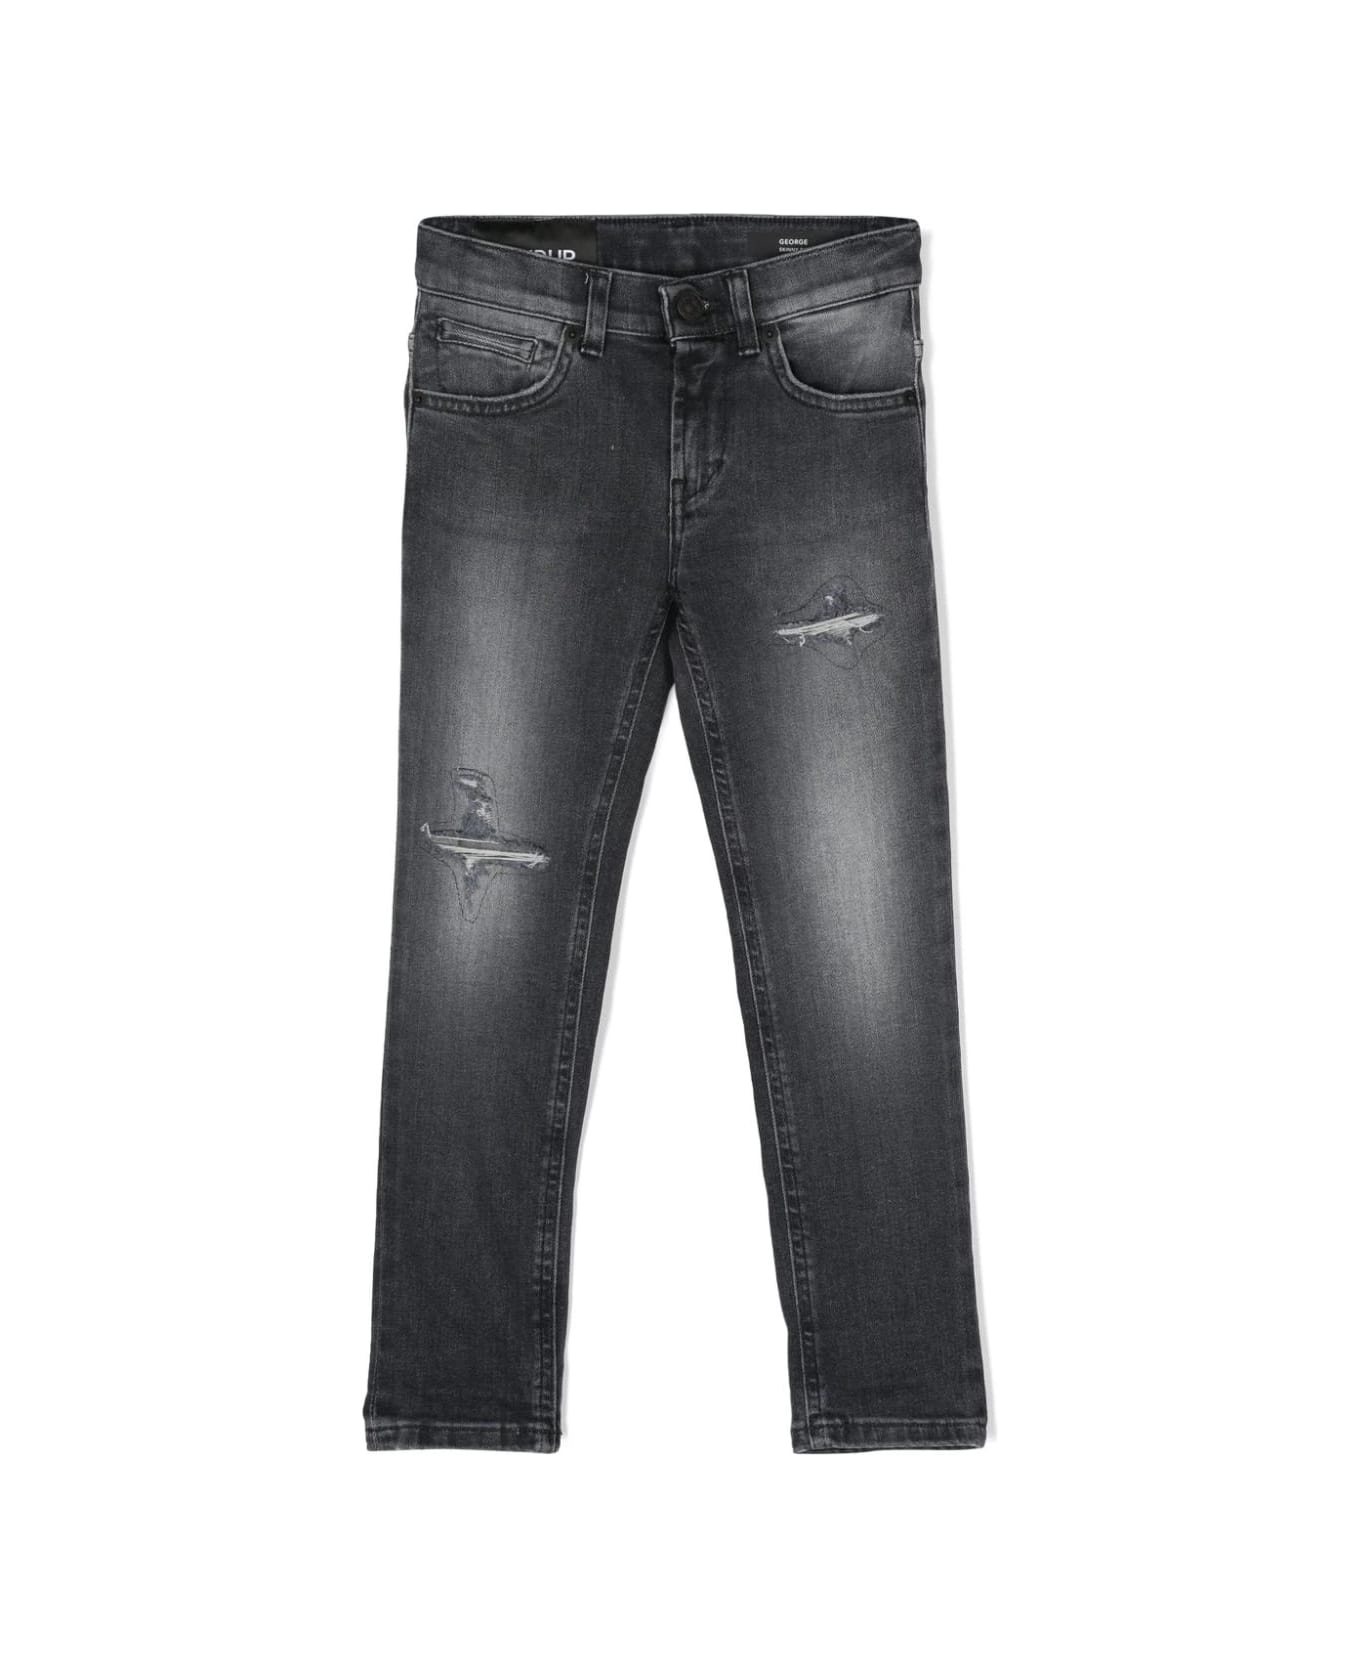 Dondup Black George Jeans With Abrasions - Grey